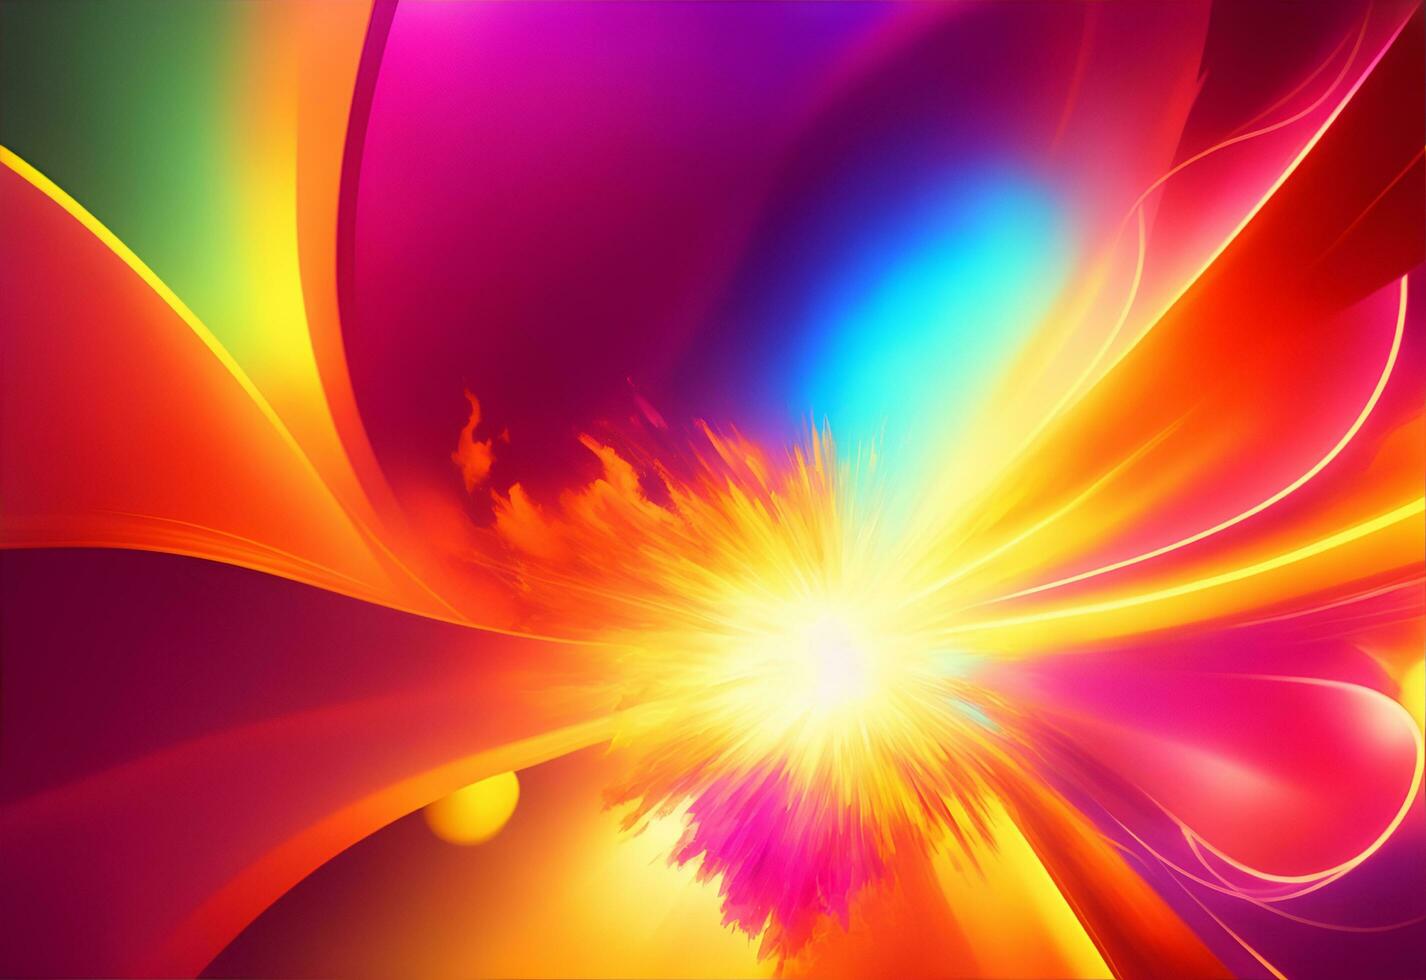 Vibrant, pulsating abstract background that radiates energy photo